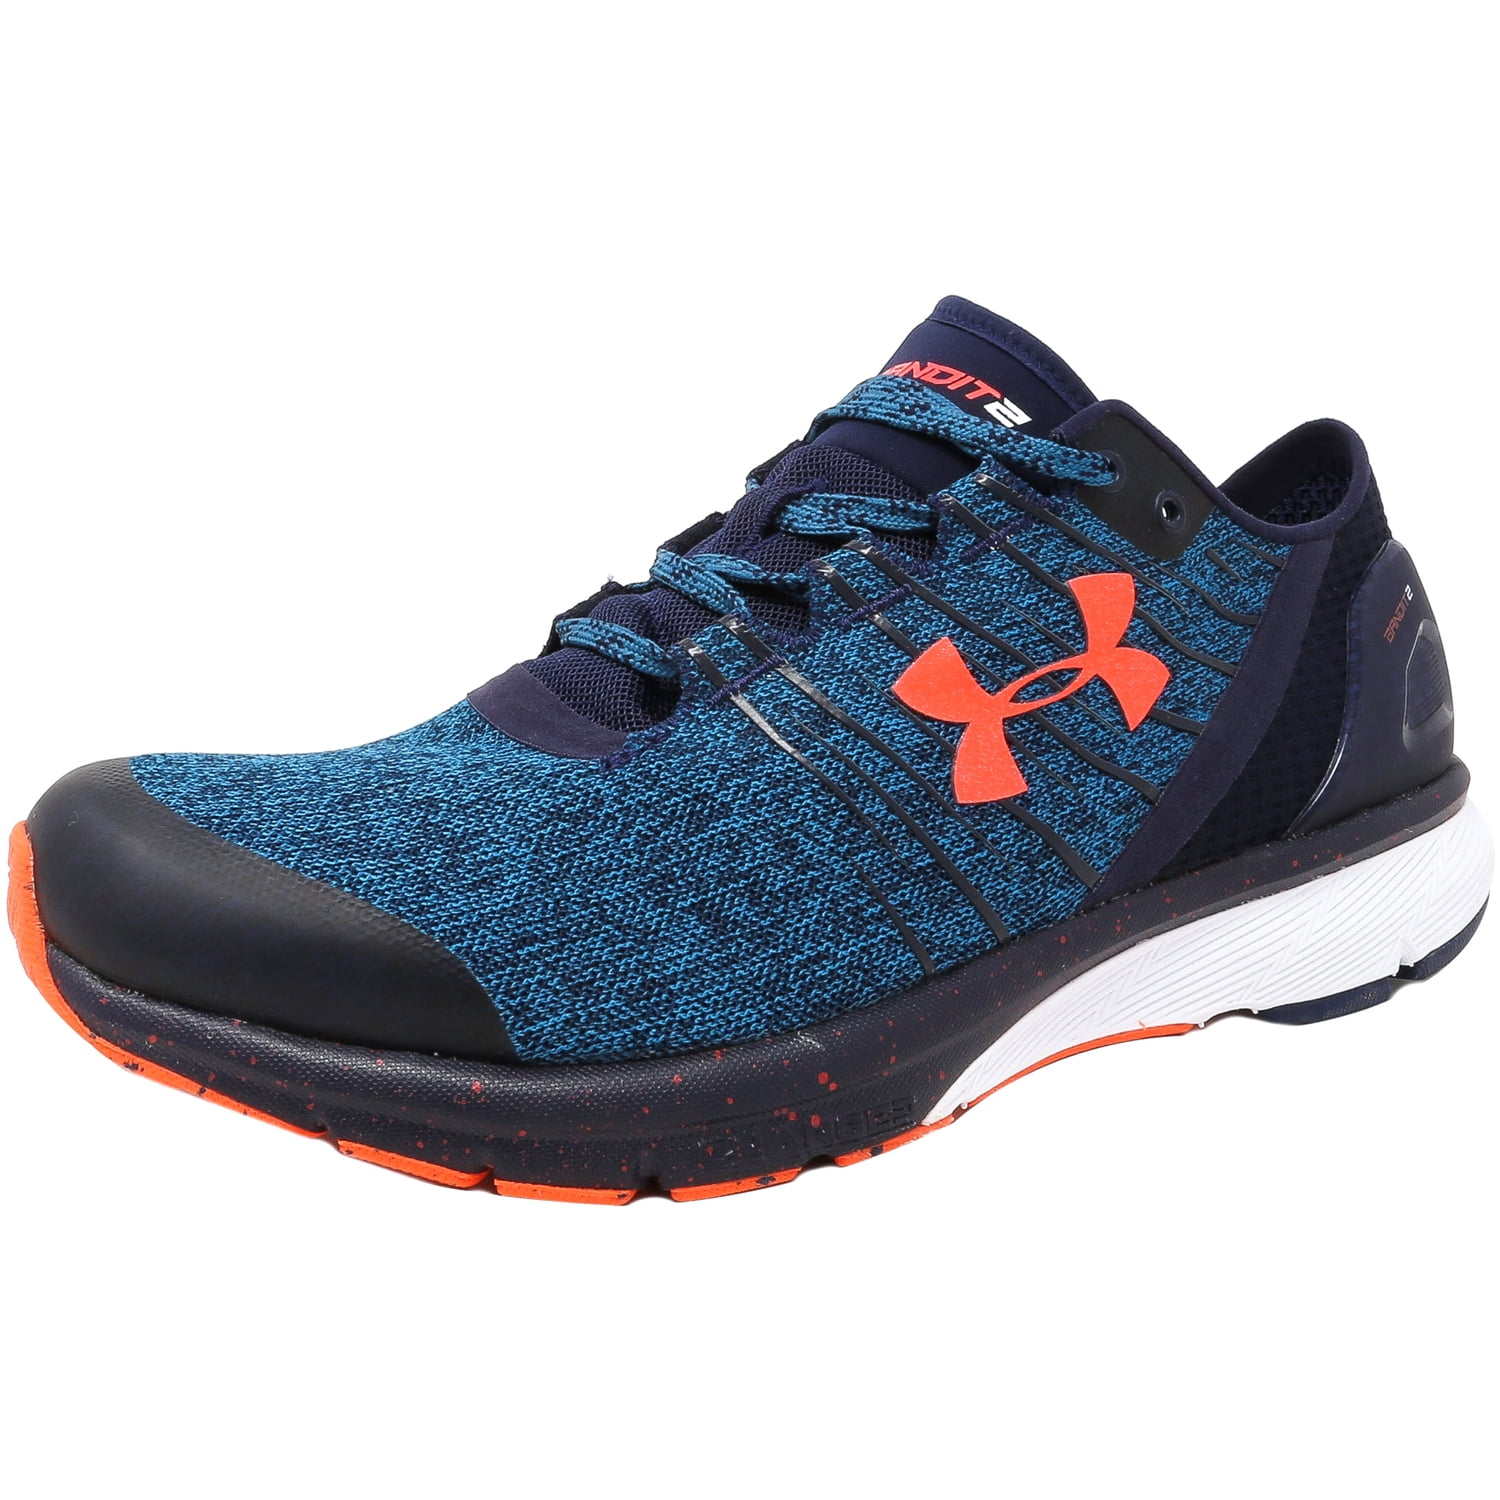 Under Armour Men's Charged Bandit 2 